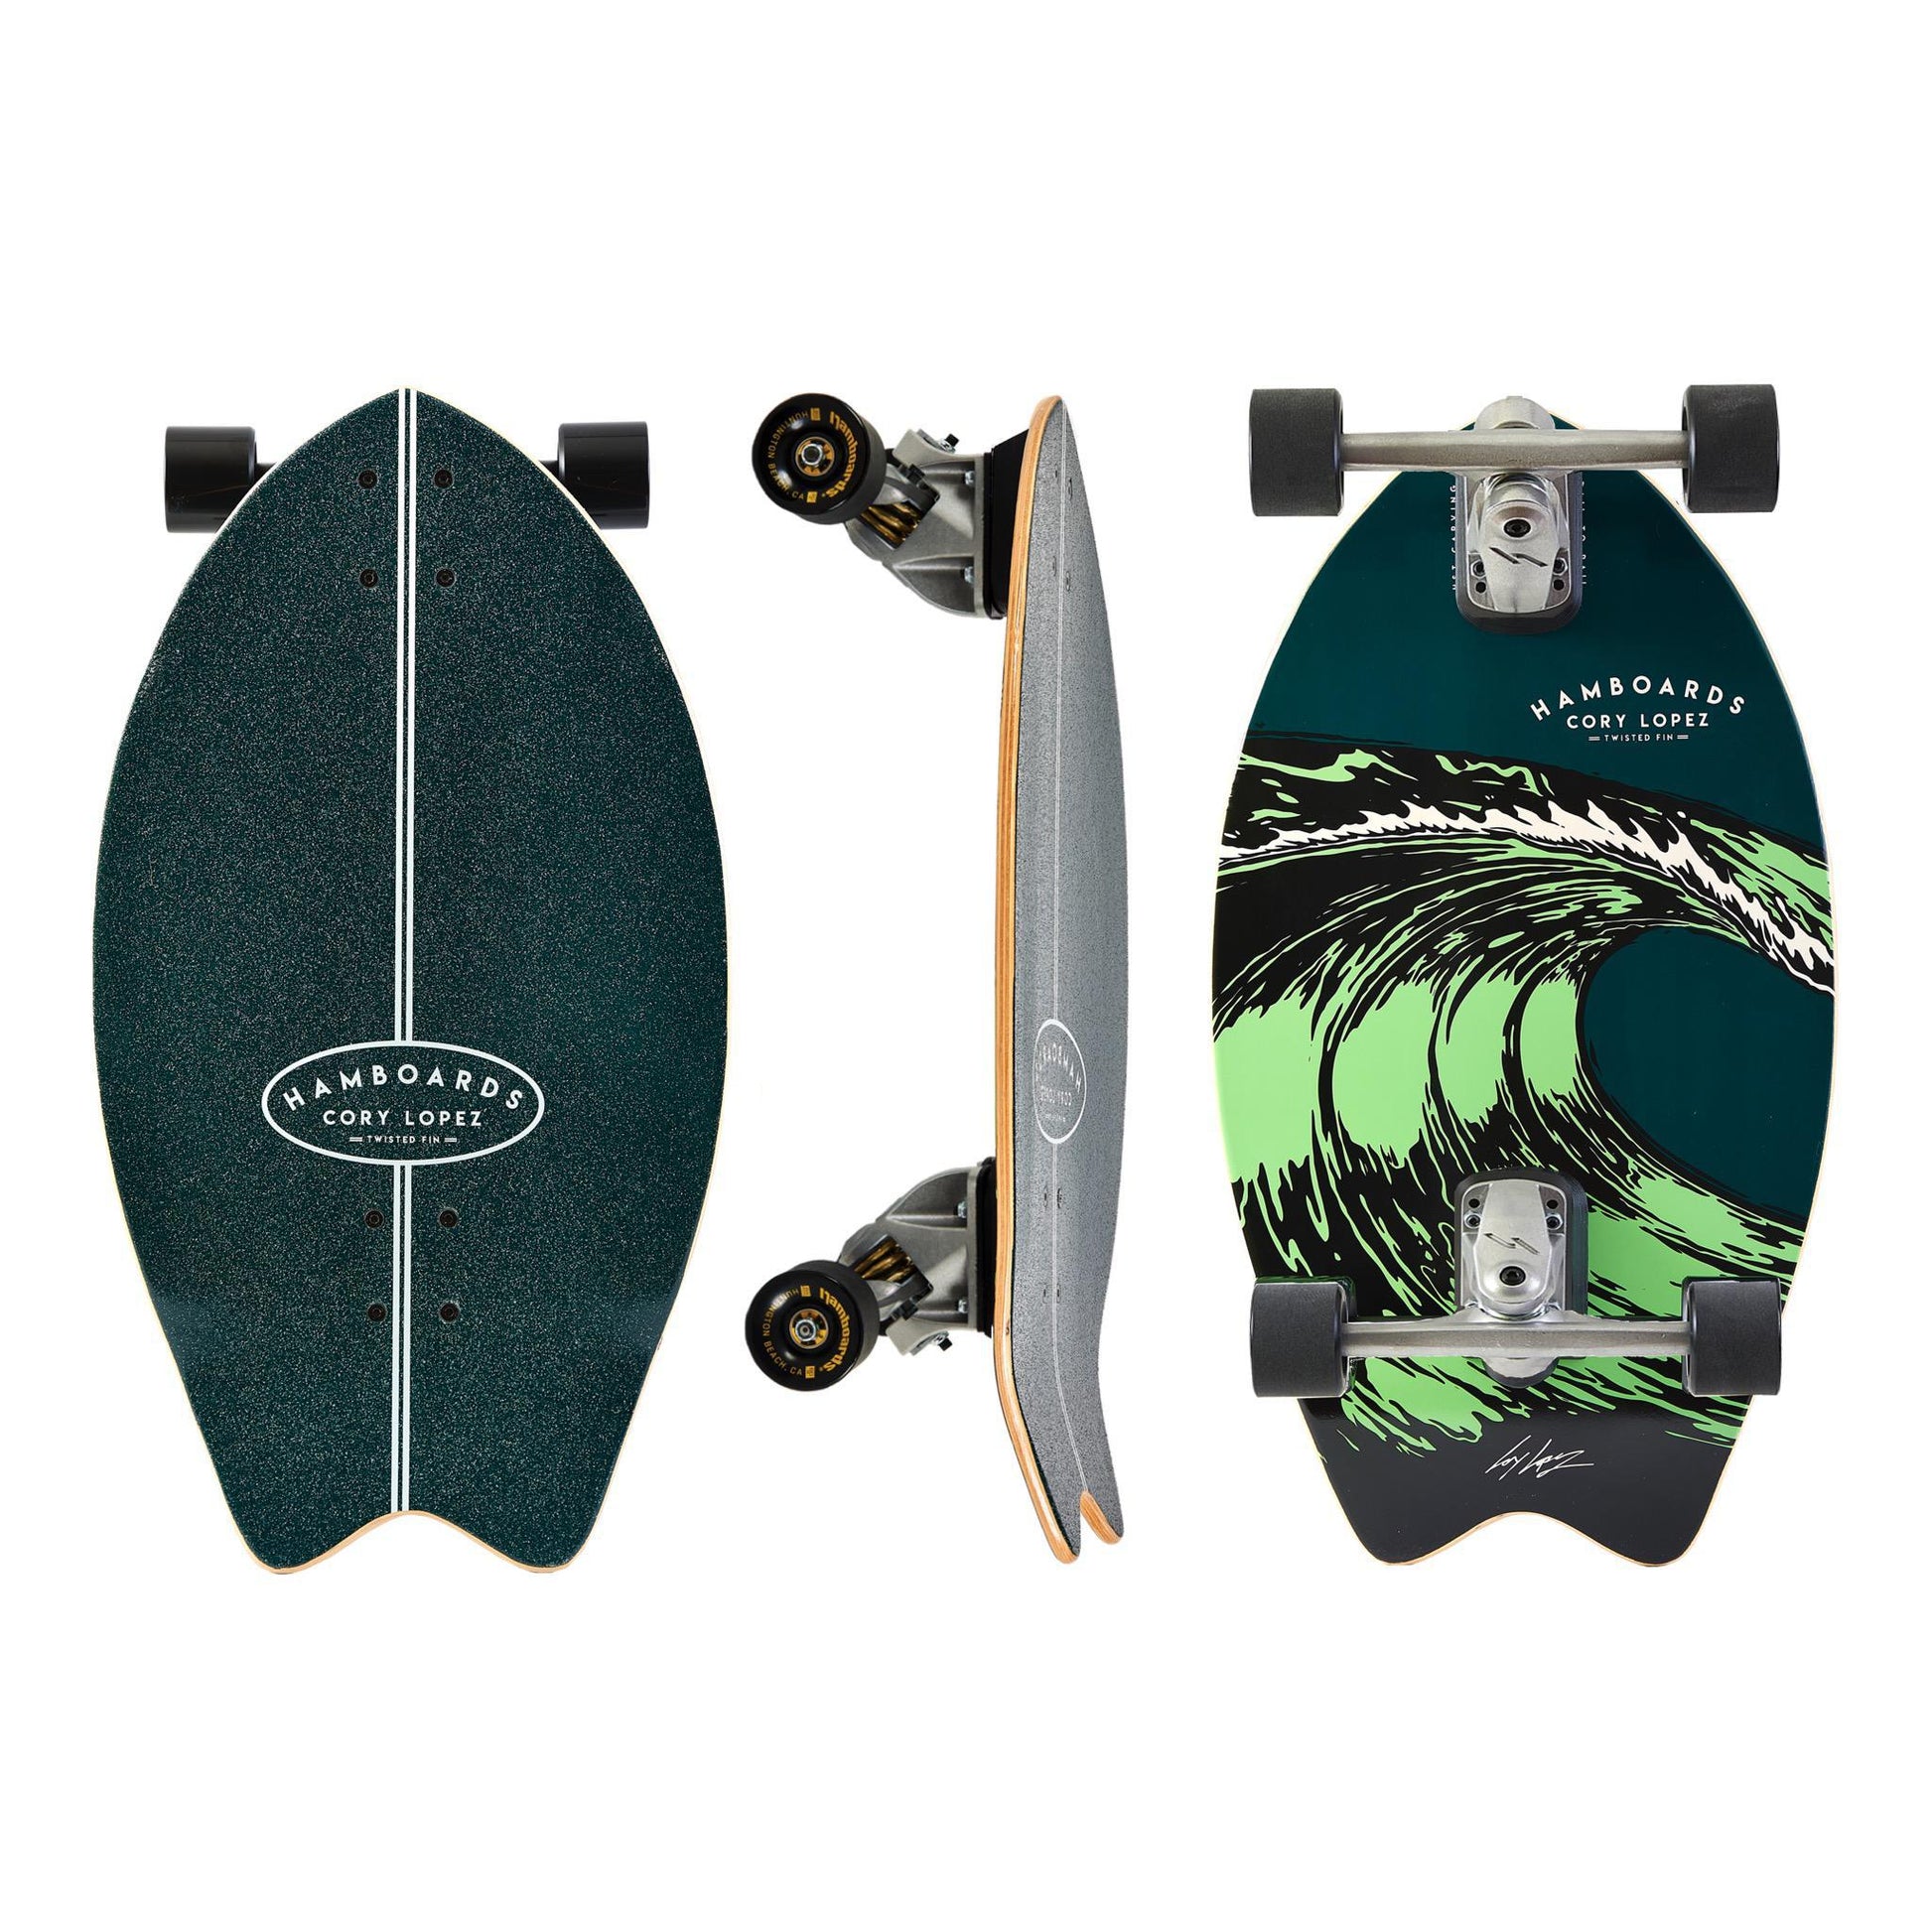 Dark Teal Twisted Fin - CL - Hamboards